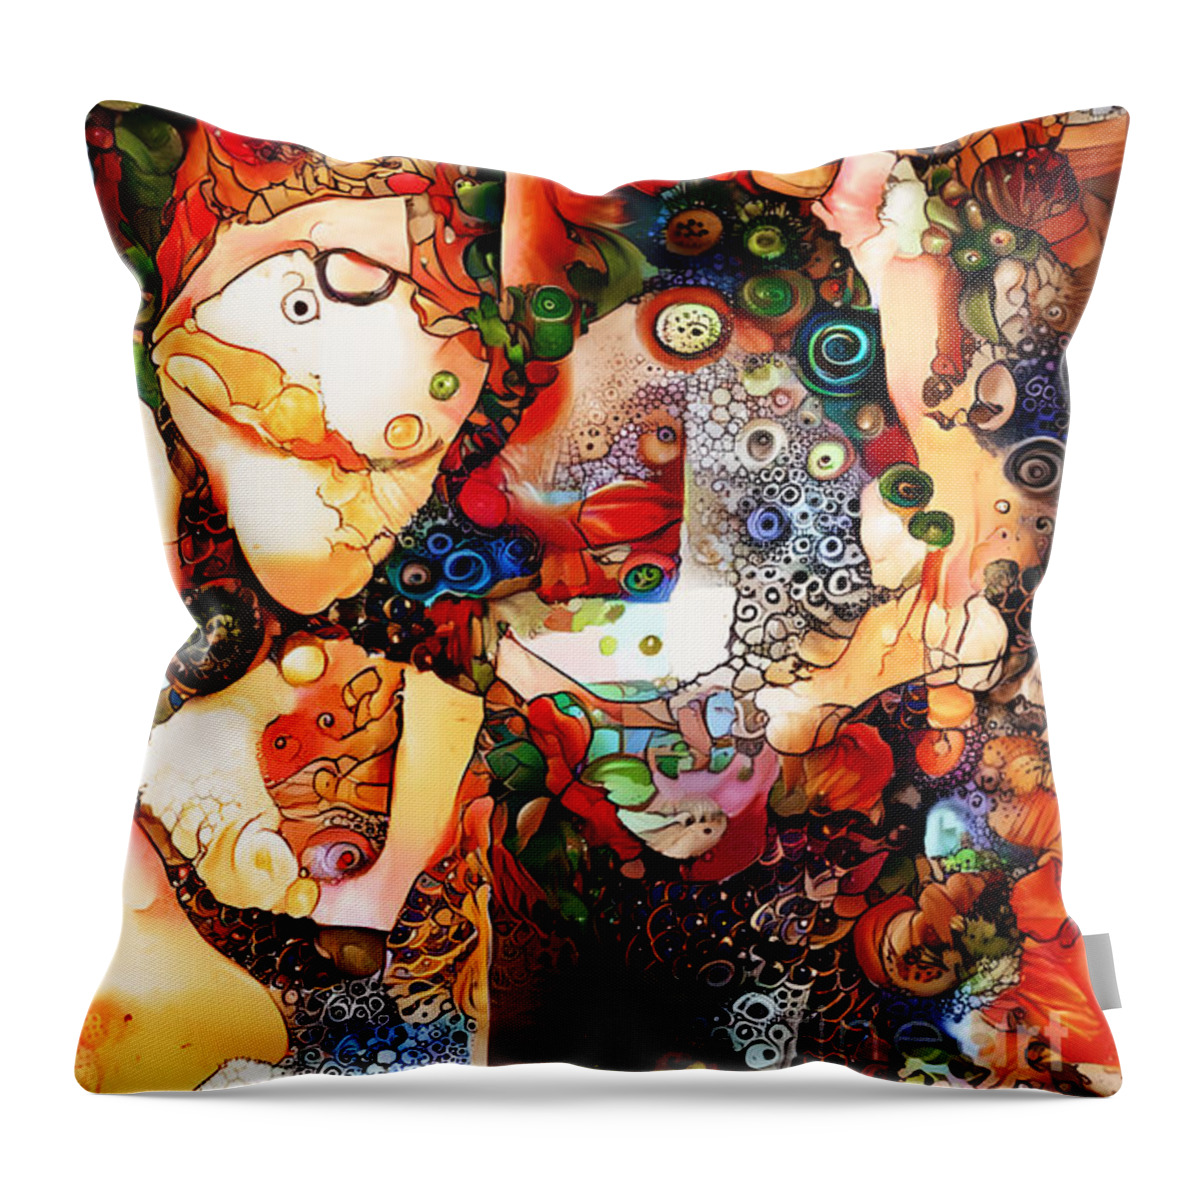 Contemporary Art Throw Pillow featuring the digital art 34 by Jeremiah Ray